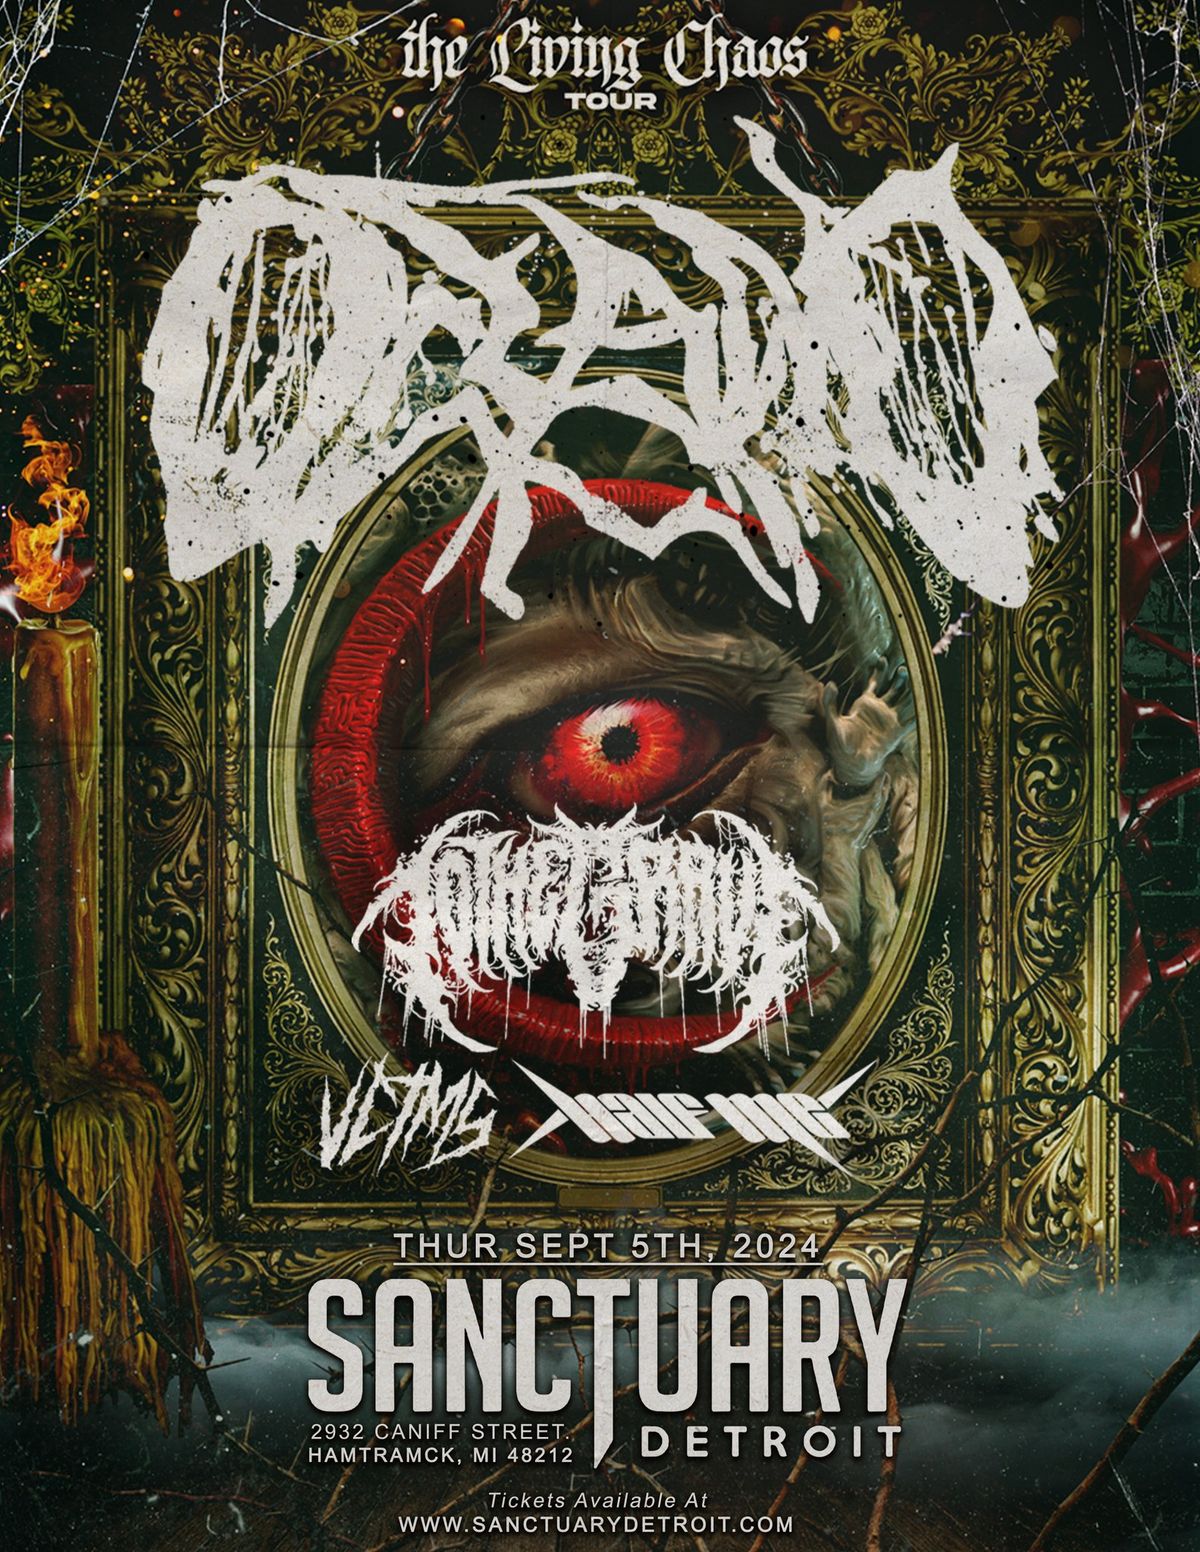 Oceano, To The Grave, Vctms, Half Me at The Sanctuary 9\/5